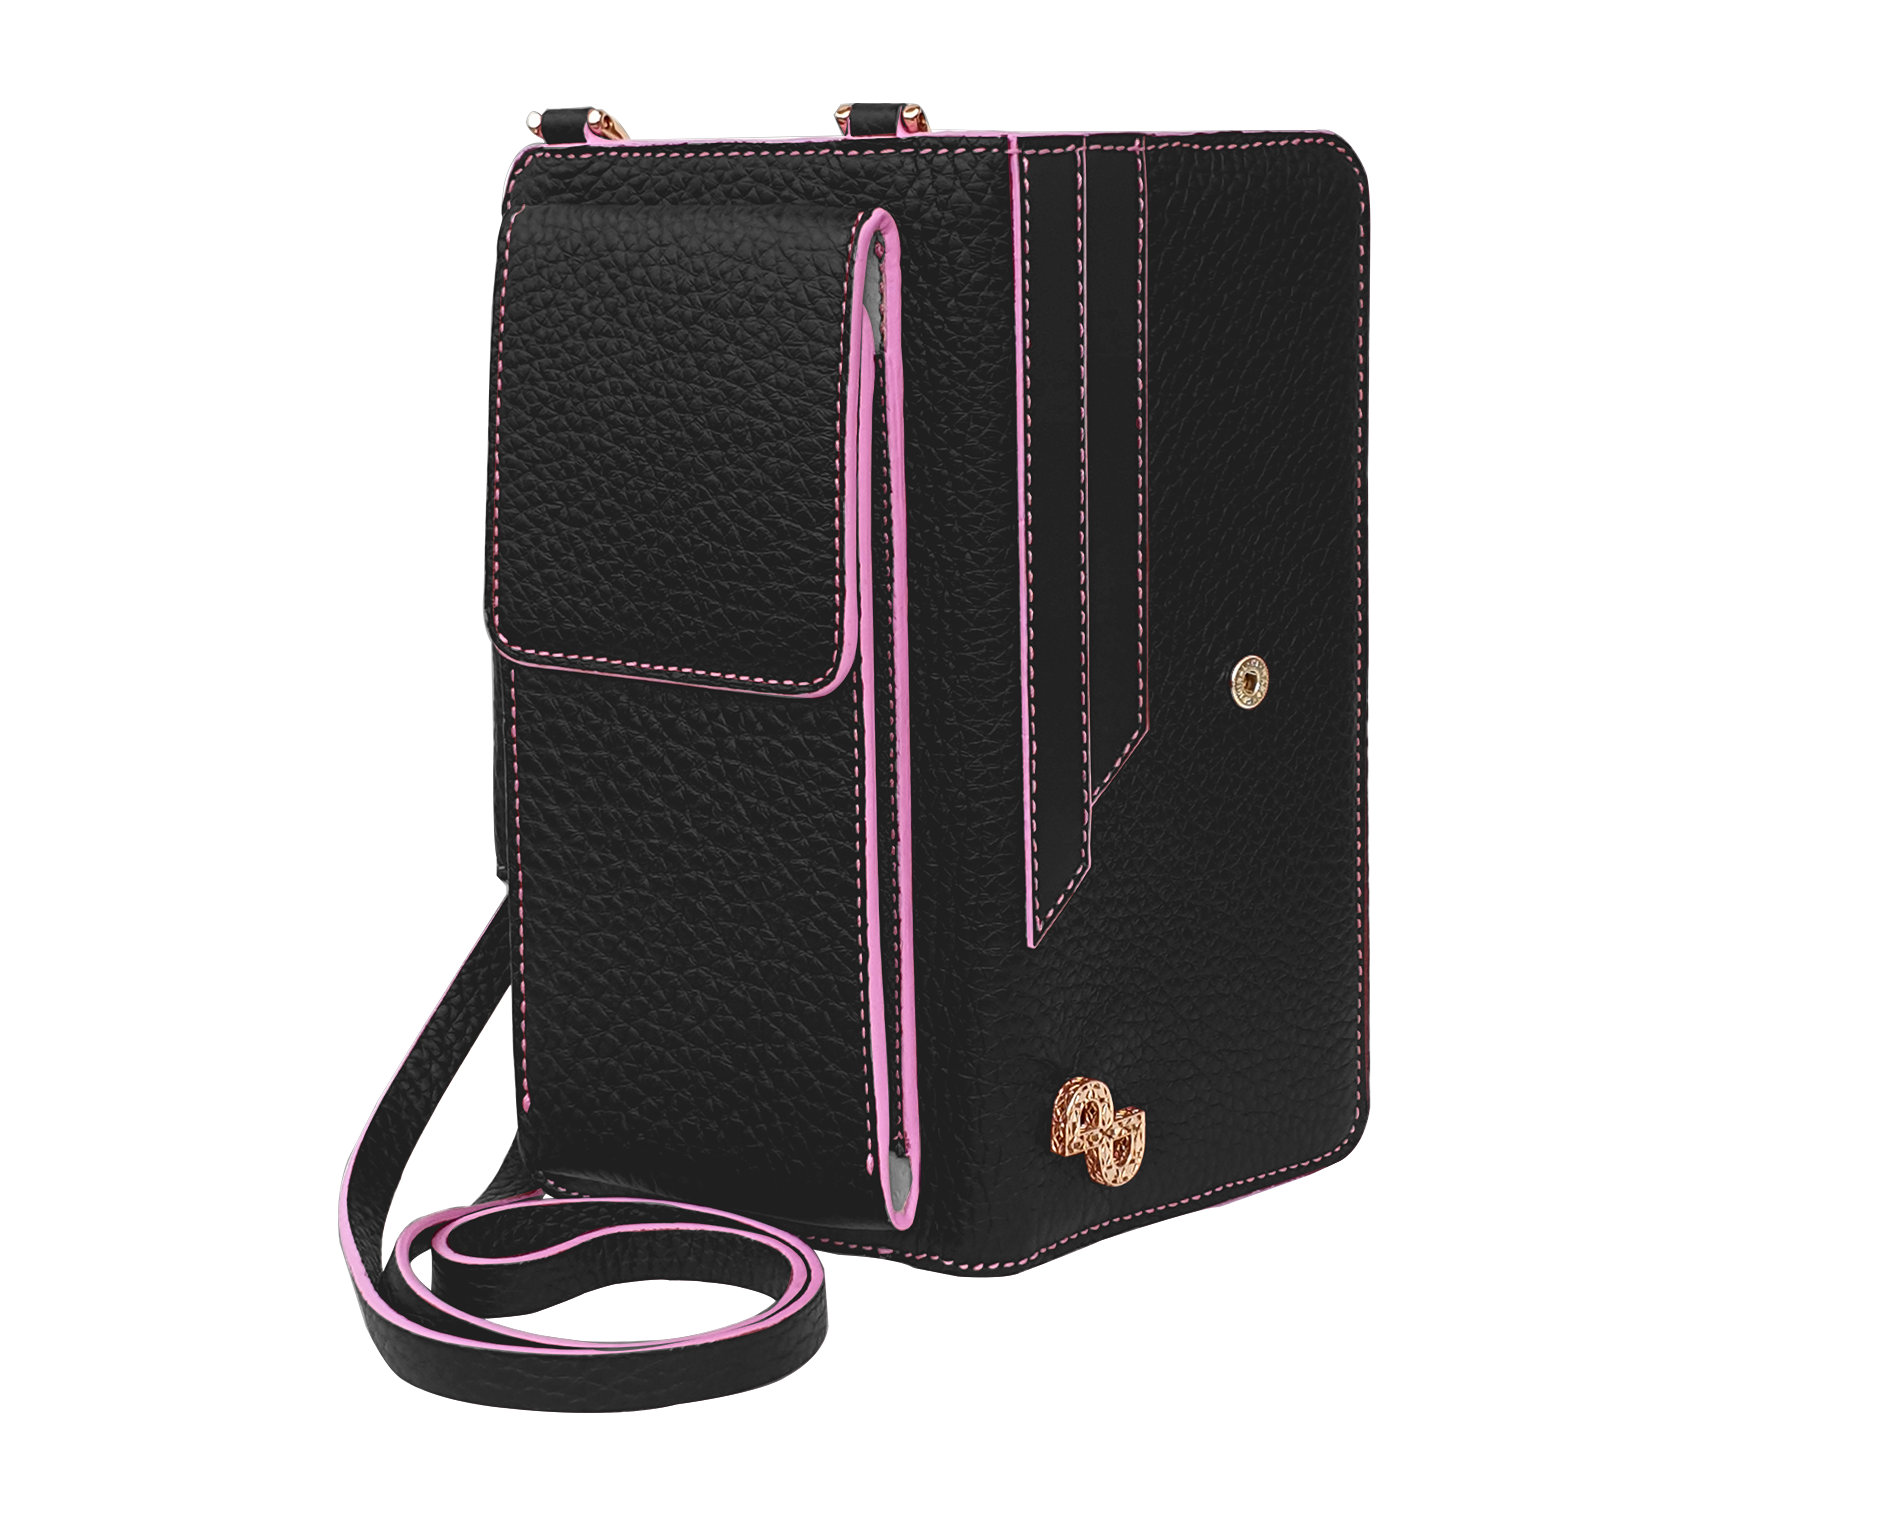 The ClAUDIA crossbosy IN black is an essential luxury piece to carry your mobile or makeup, credit card, cash etc.